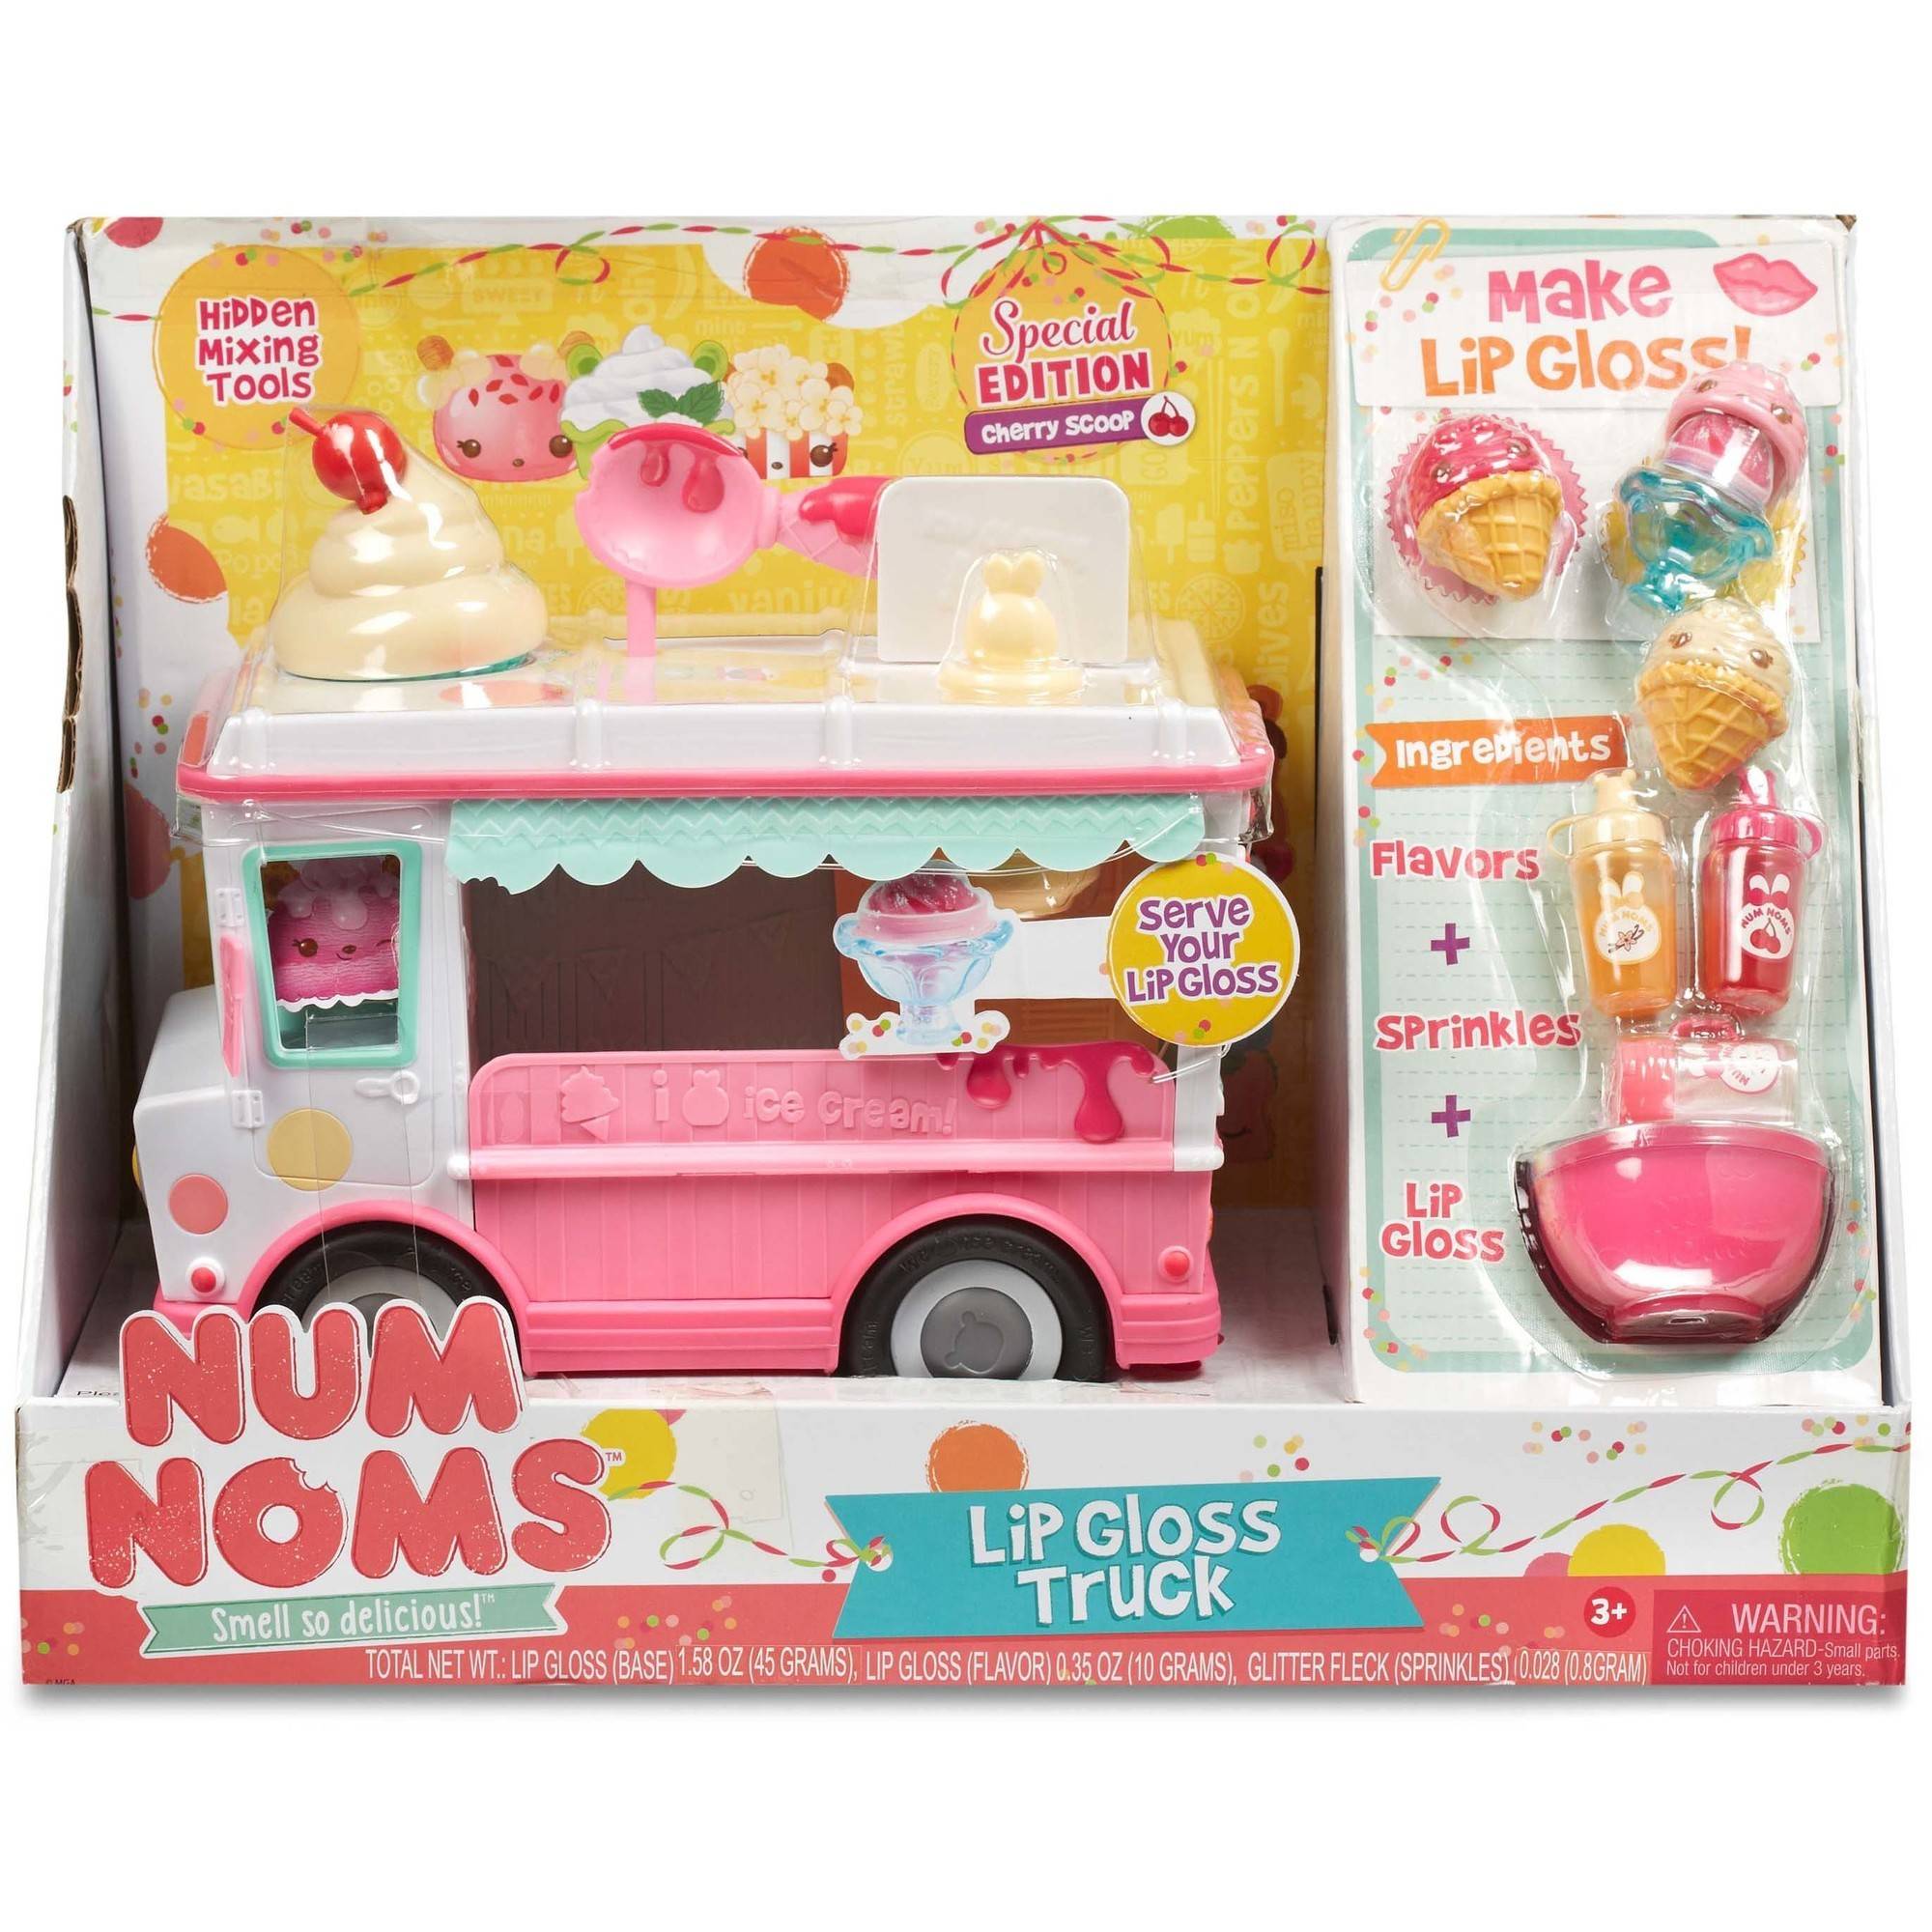 Num Noms Lipgloss Truck Craft Kit - image 3 of 4